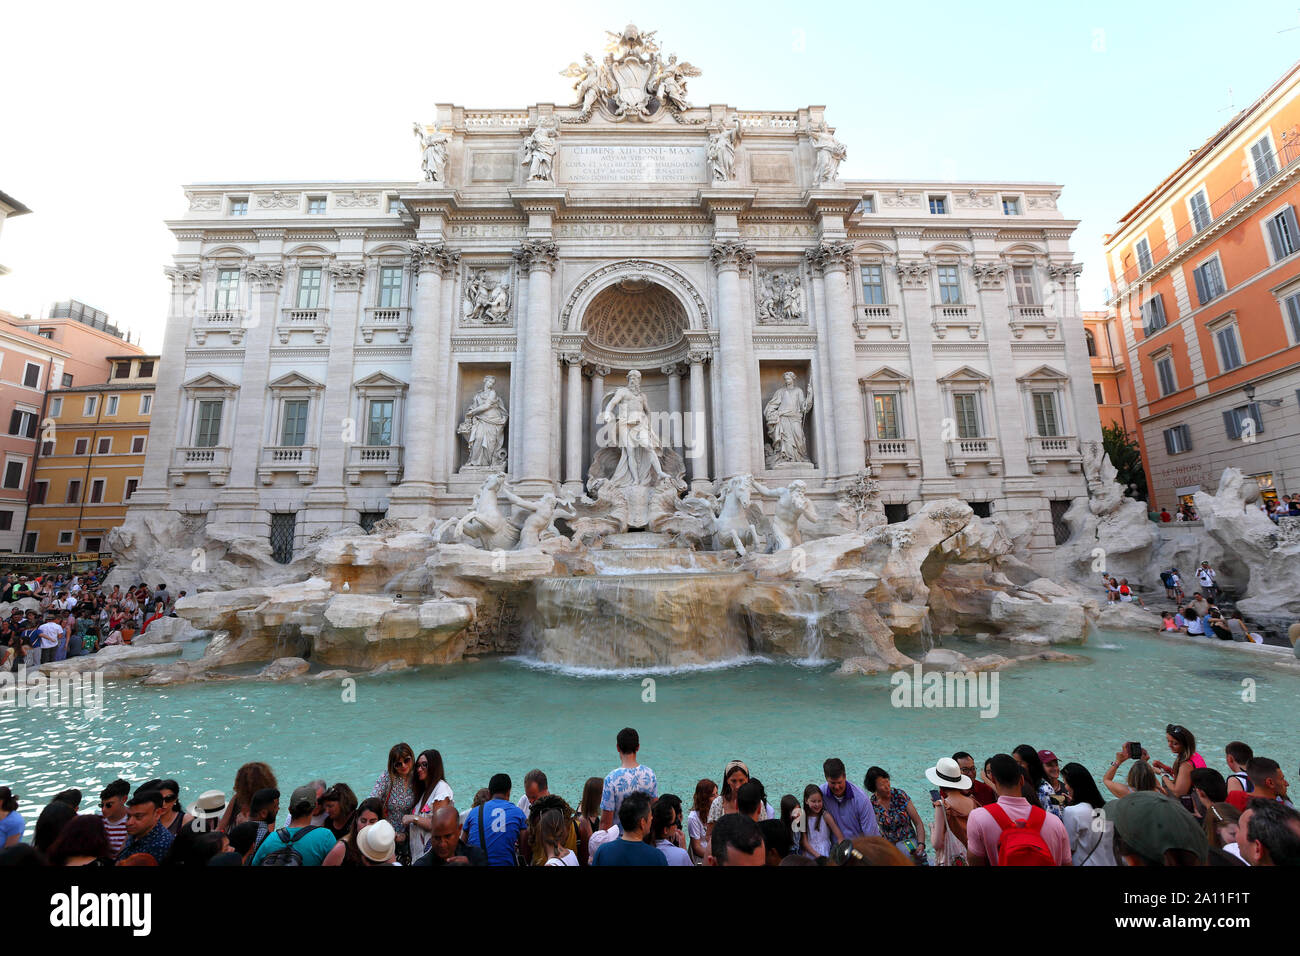 Editorial Rome, Italy - June 15th 2019: Tourists flock to the Trevi Fountain, a major architectural and artistic landmark. Stock Photo